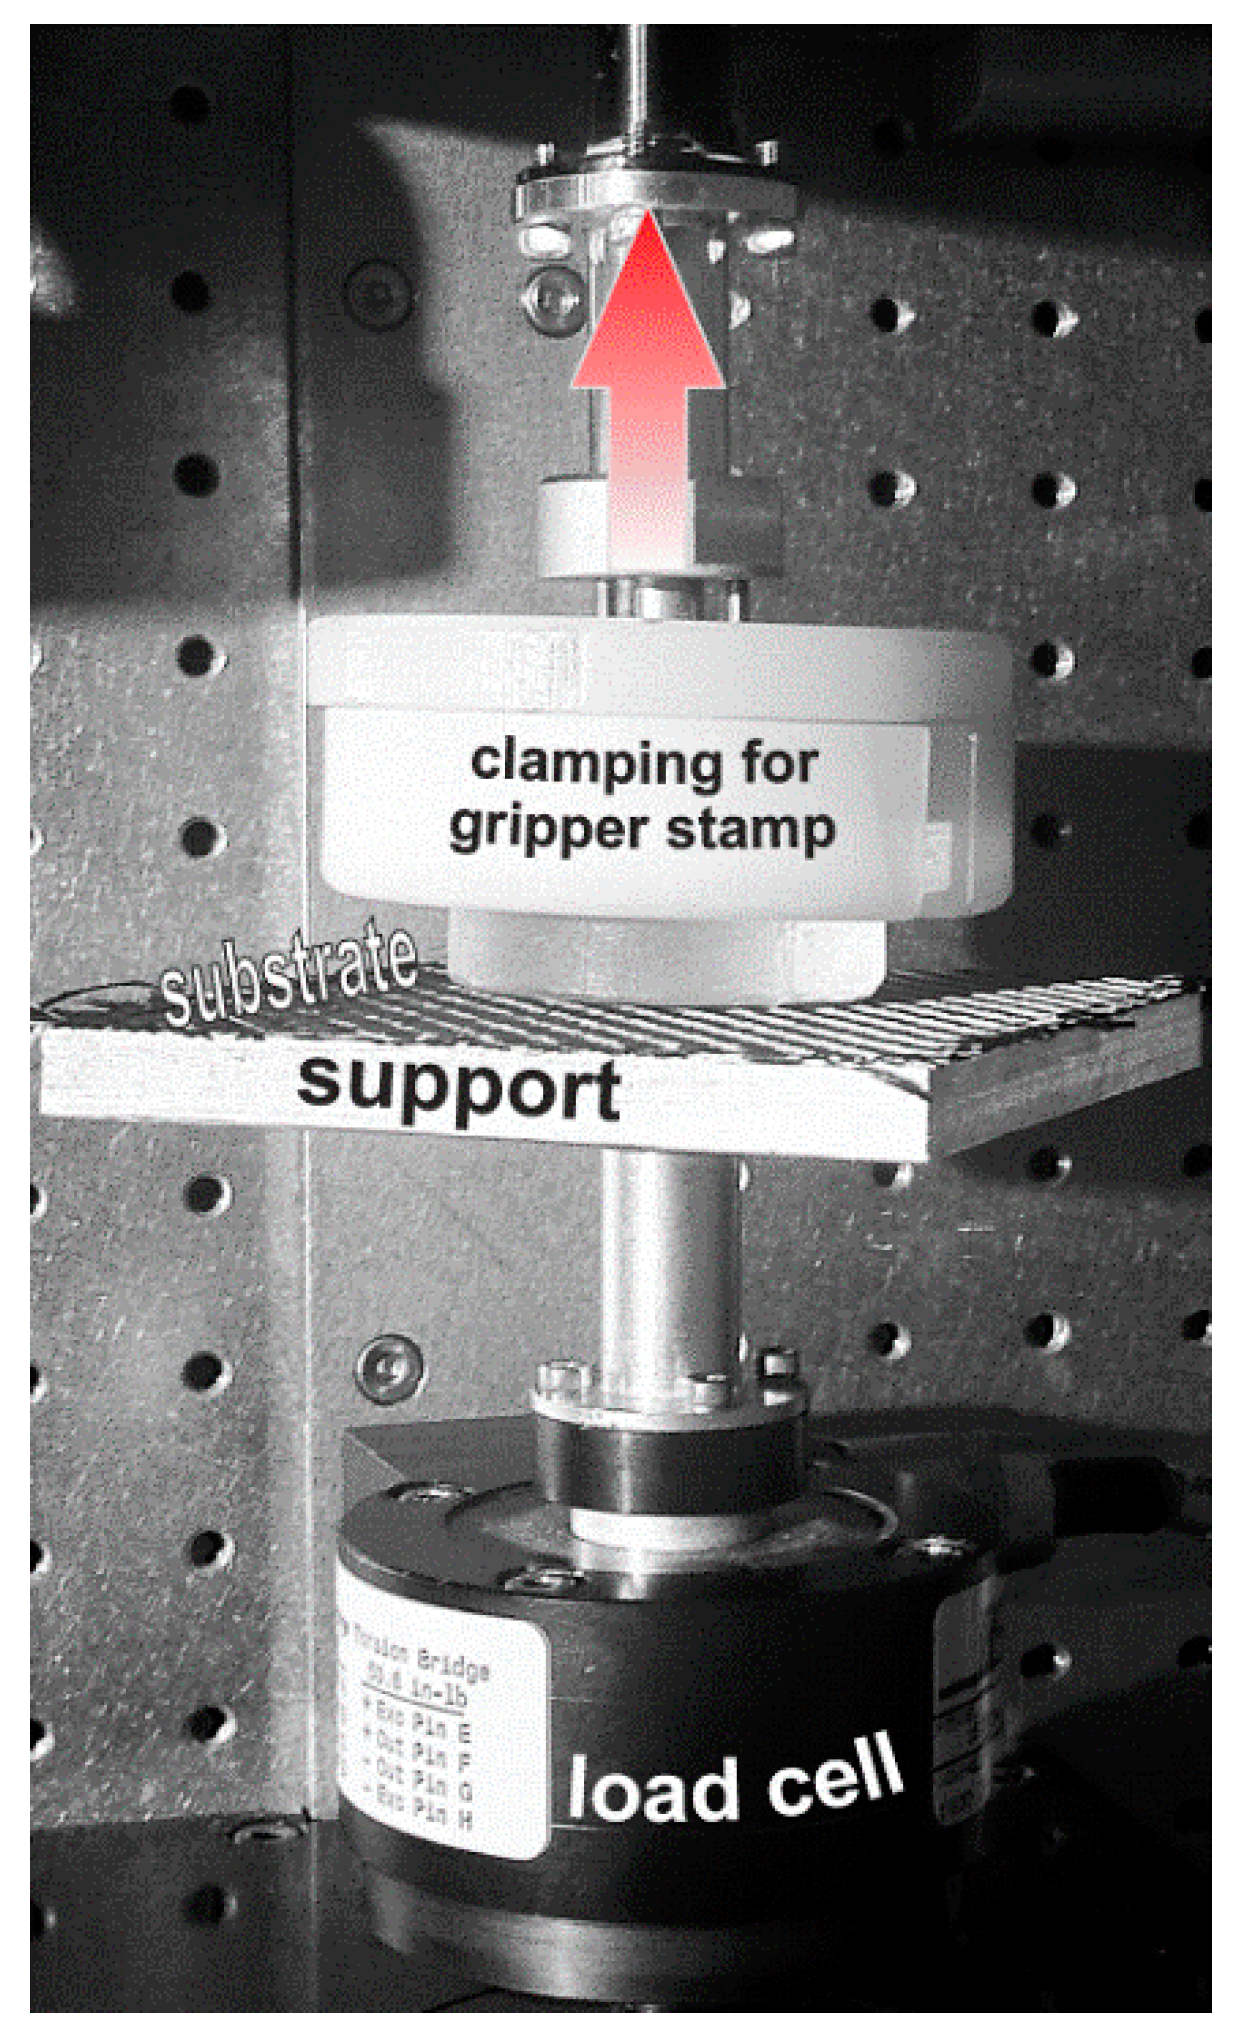 Polymers Free Full Text Adherence Kinetics Of A Pdms Gripper With Inherent Surface Tackiness Html